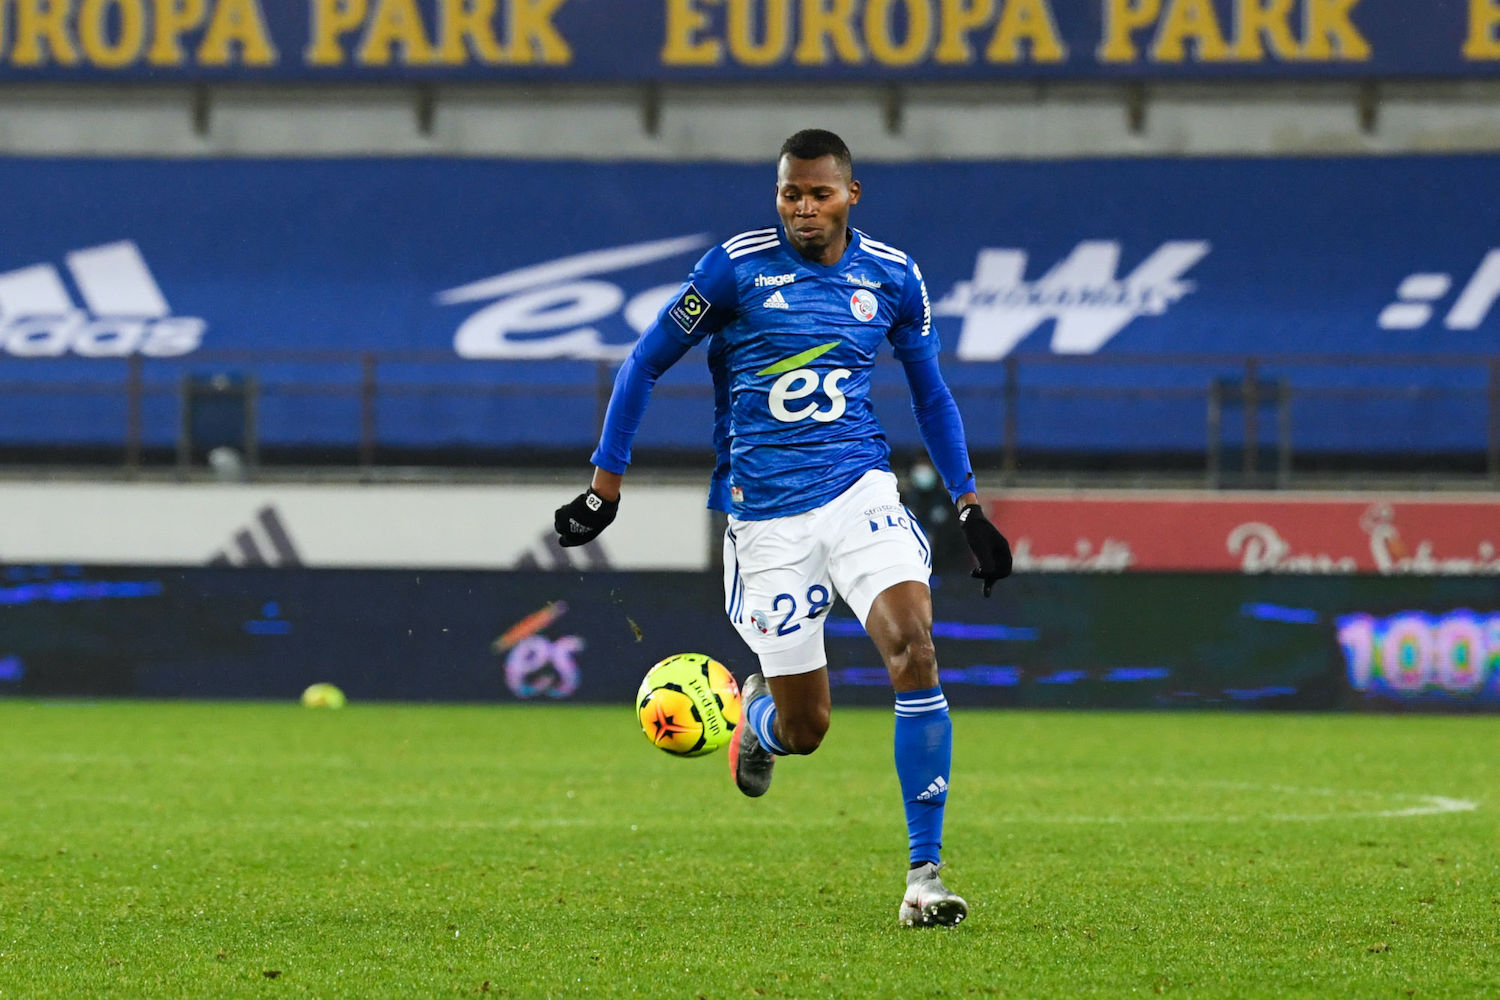 Habib DIALLO of Strasbourg during the Ligue 1 match between RC Strasbourg and Nimes Olympique at Stade de la Meinau on January 6, 2021 in Strasbourg, France. (Photo by Sebastien Bozon/Icon Sport) - Habib DIALLO - Stade de la Meinau - Strasbourg (France)